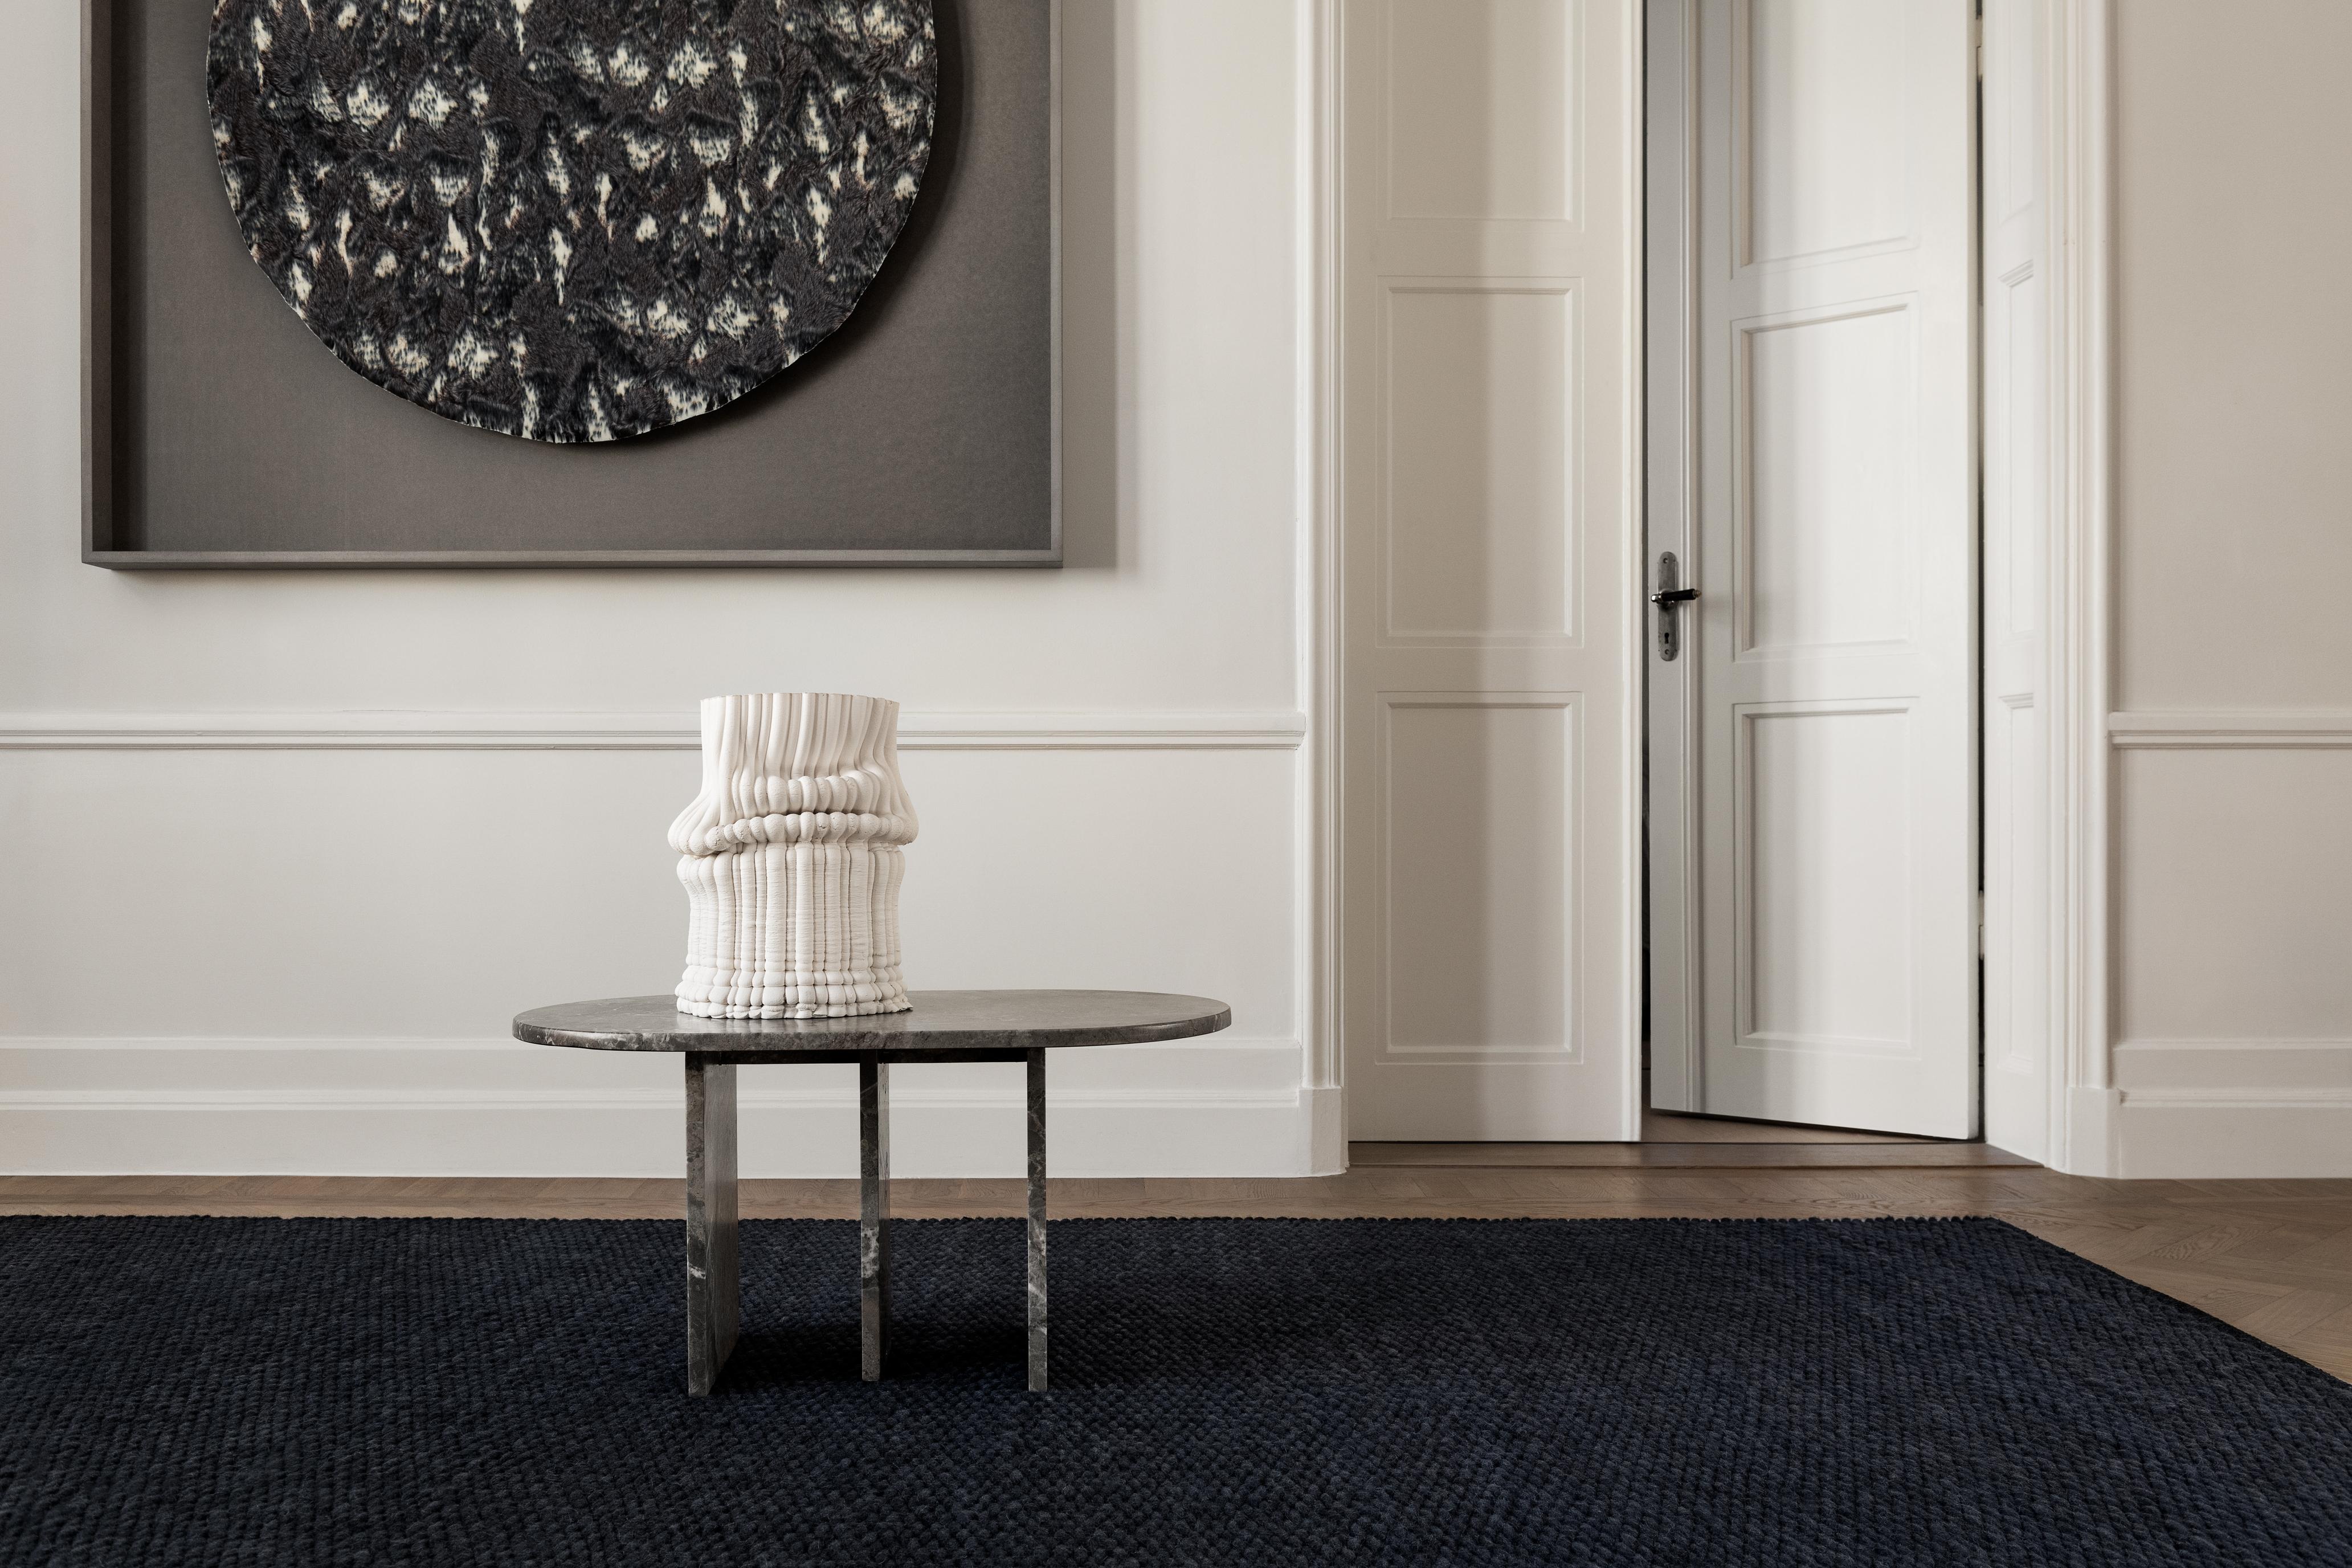 The Dunes collection is all about the beauty of its texture. Woven using a heavy yarn to create a thick luxurious feeling rug. This very dark blue color is inspired by the almost black nordic winter night sky

100% quality wool for softness and